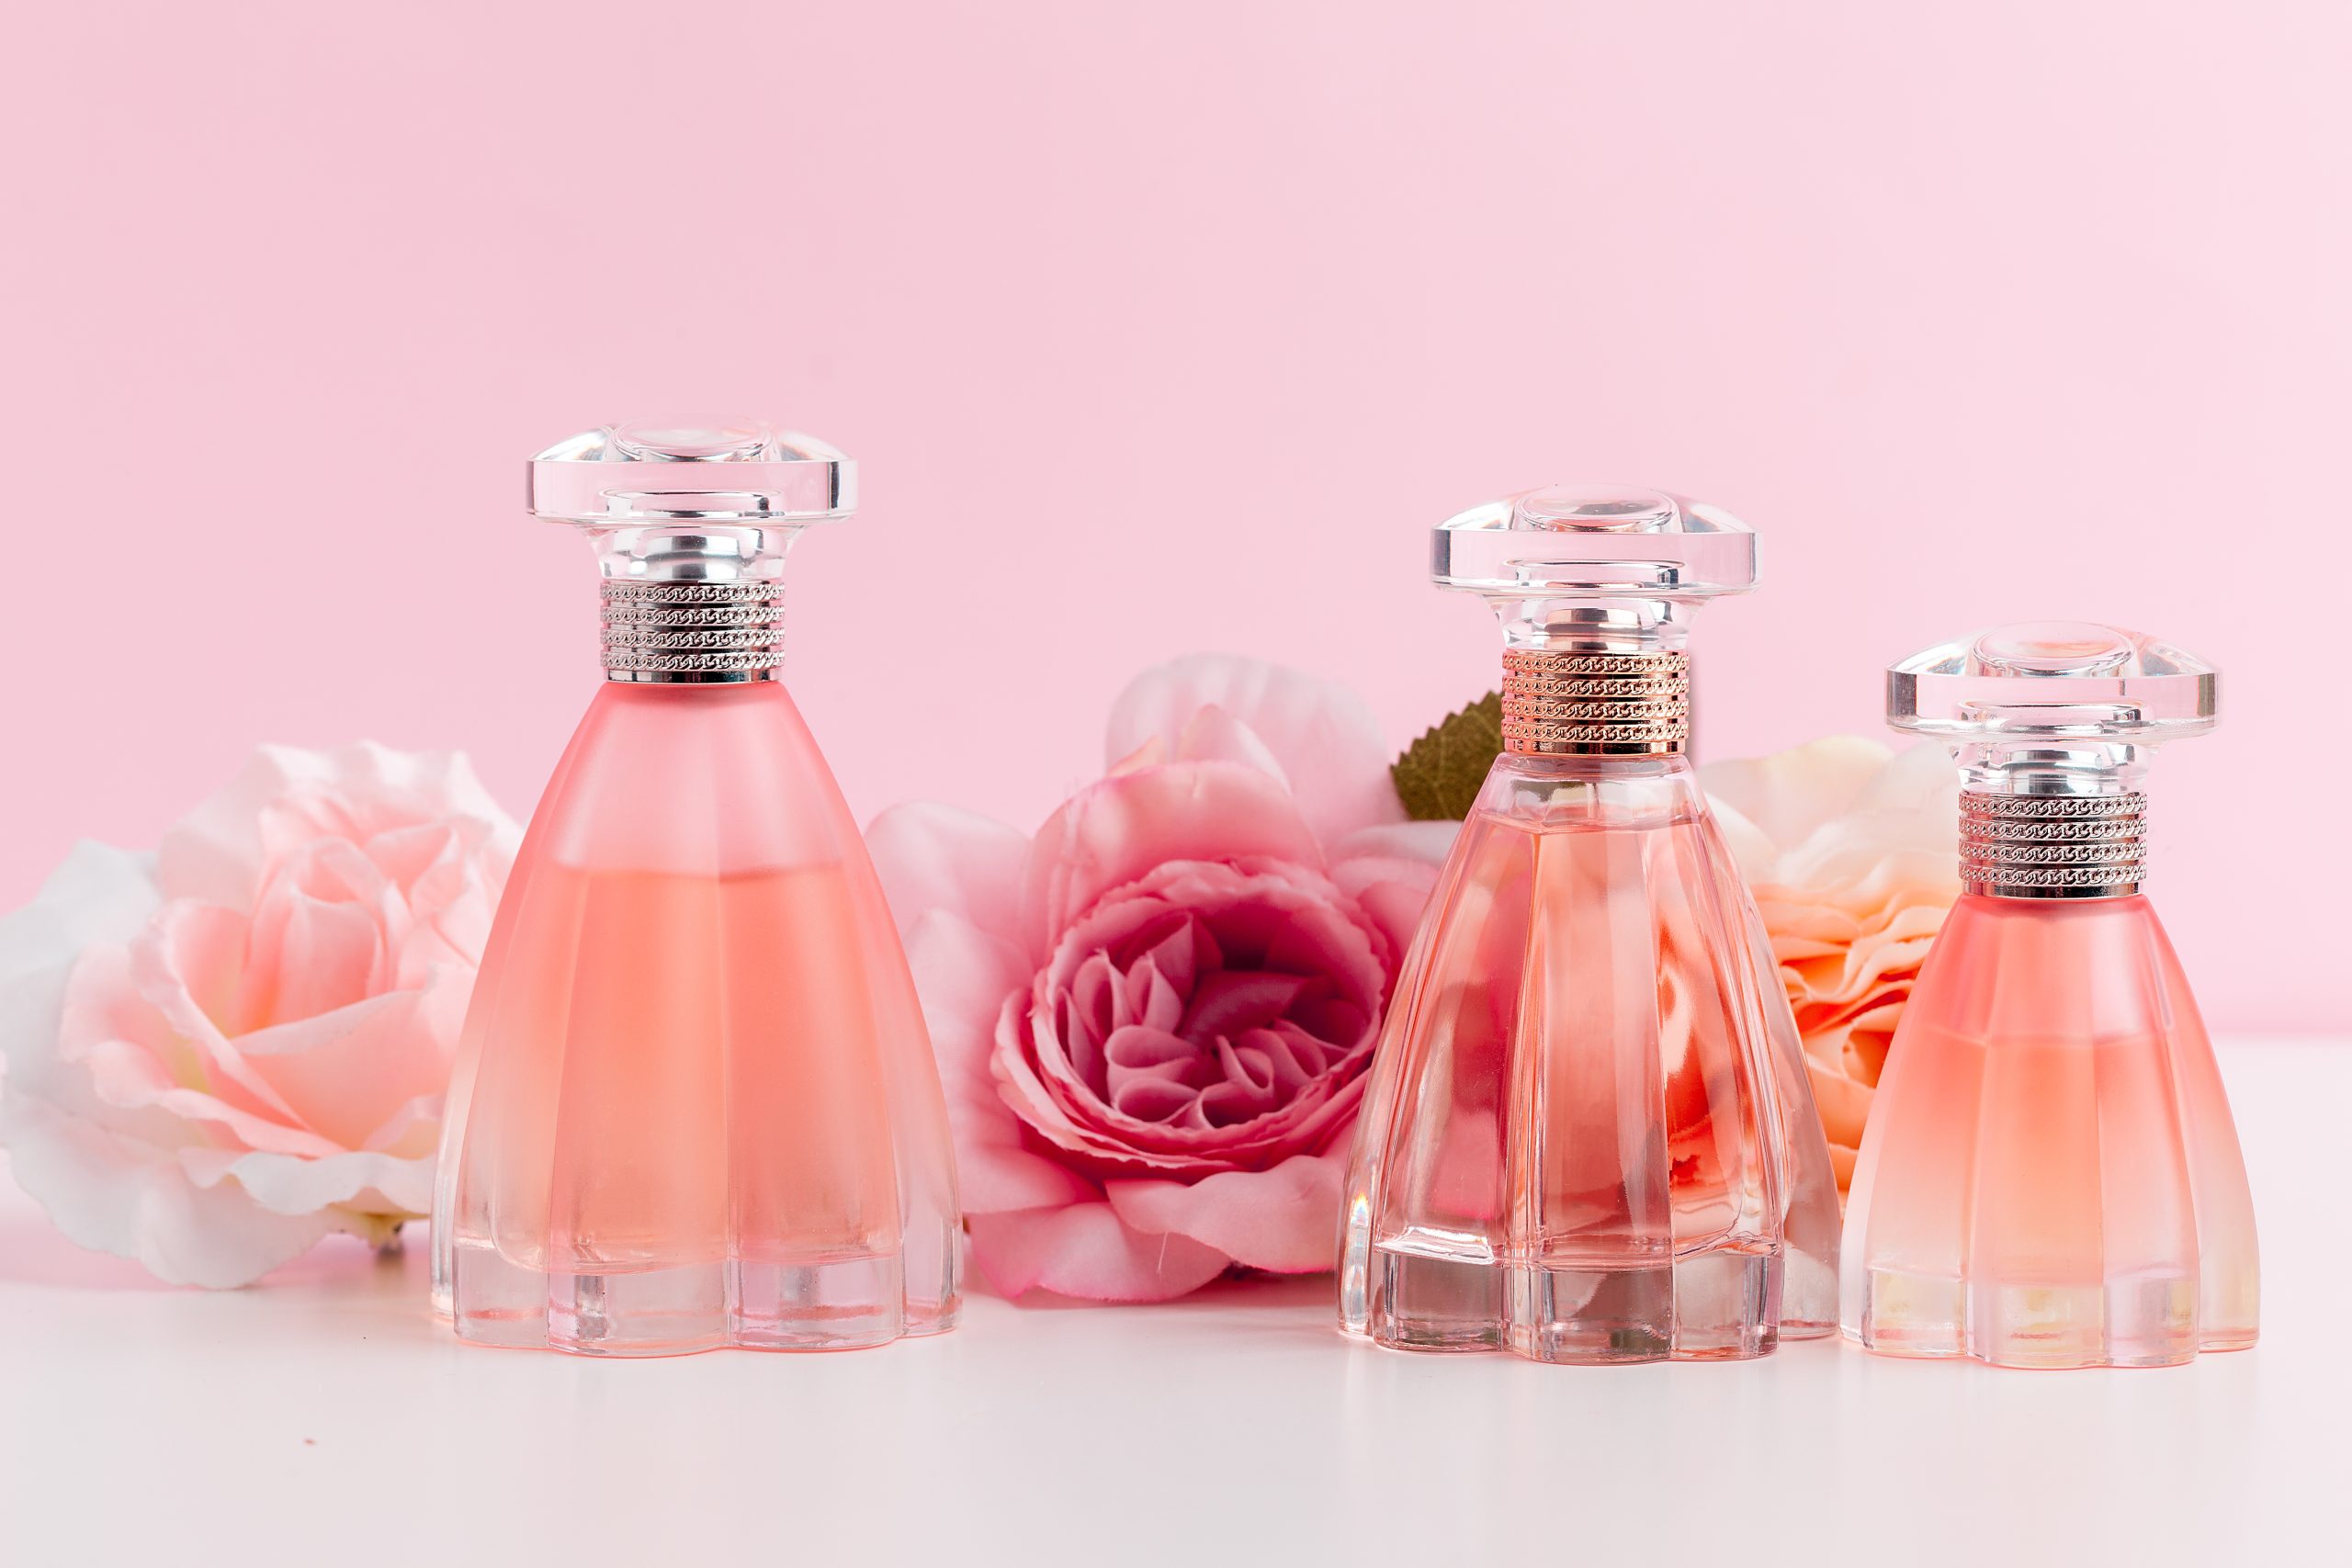 https://edana.ch/wp-content/uploads/2022/09/bottle-of-perfume-with-flowers-on-color-background-2021-12-14-19-47-22-utc-scaled.jpg